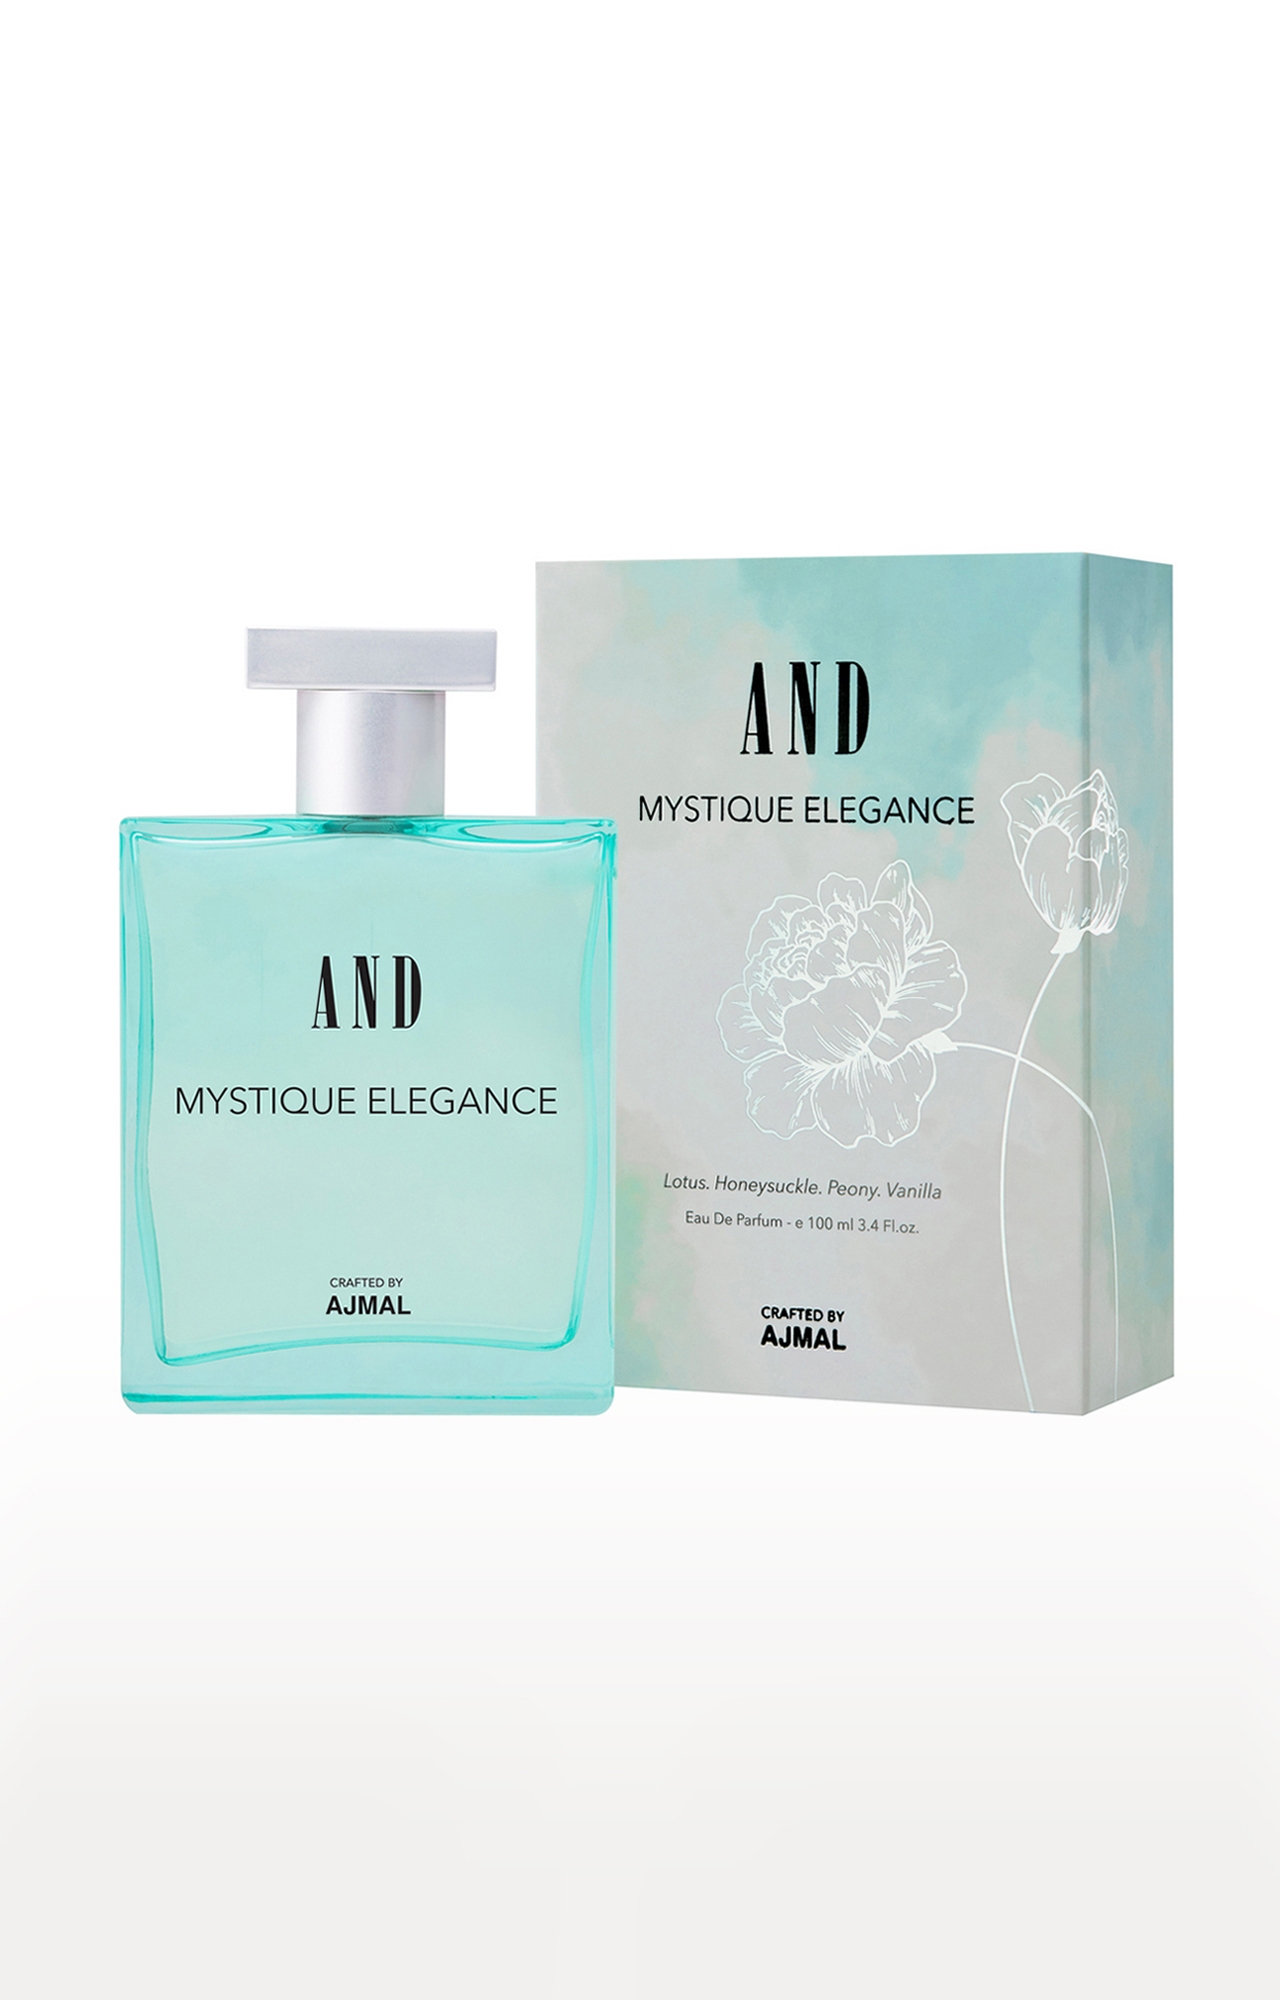 And Mystique Elegance Eau De Parfum 100ML Long Lasting Scent Spray Gift For Women Crafted By Ajmal